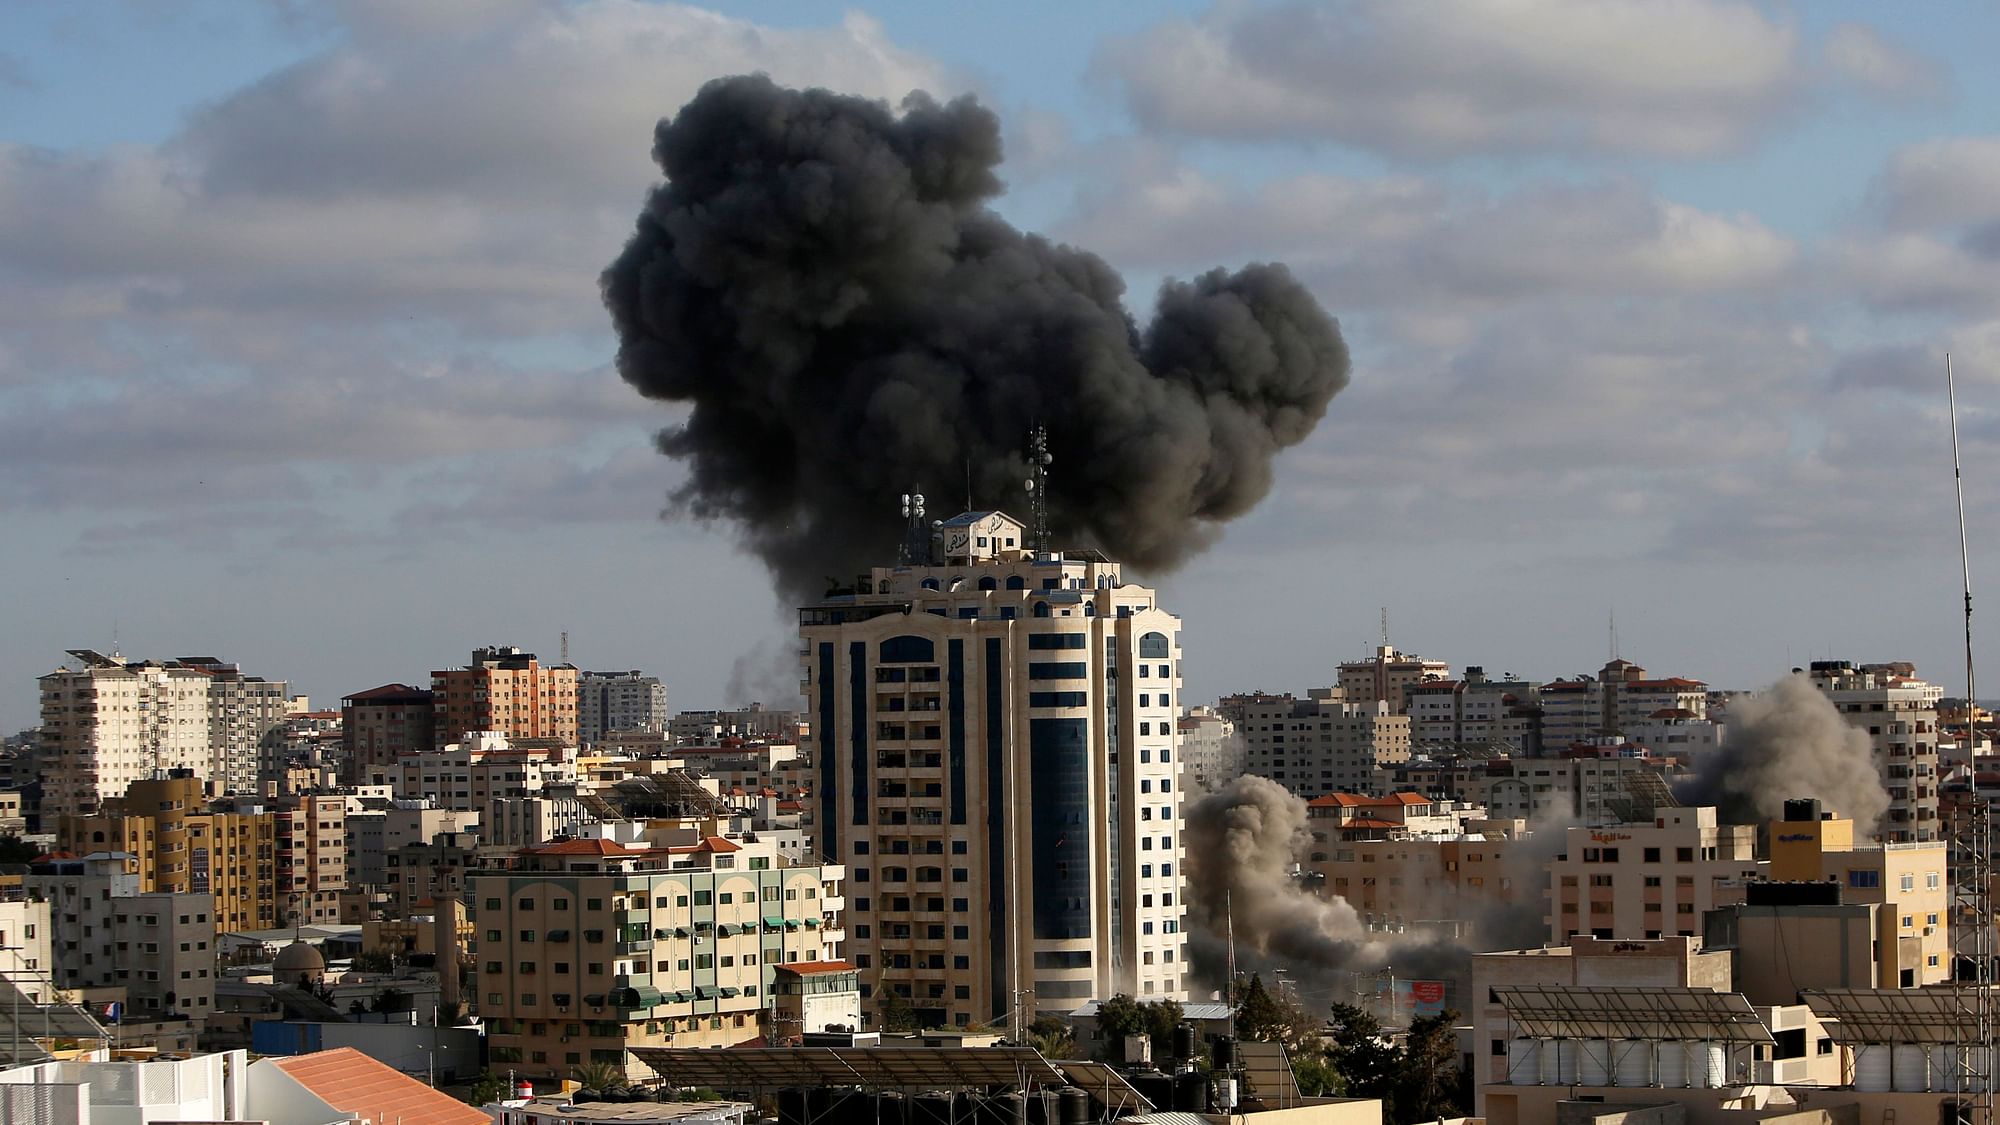 An Israeli air strike hits a building in Gaza City, Monday, May 17, 2021. The Israeli military had unleashed a wave of heavy airstrikes Monday on the Gaza Strip.